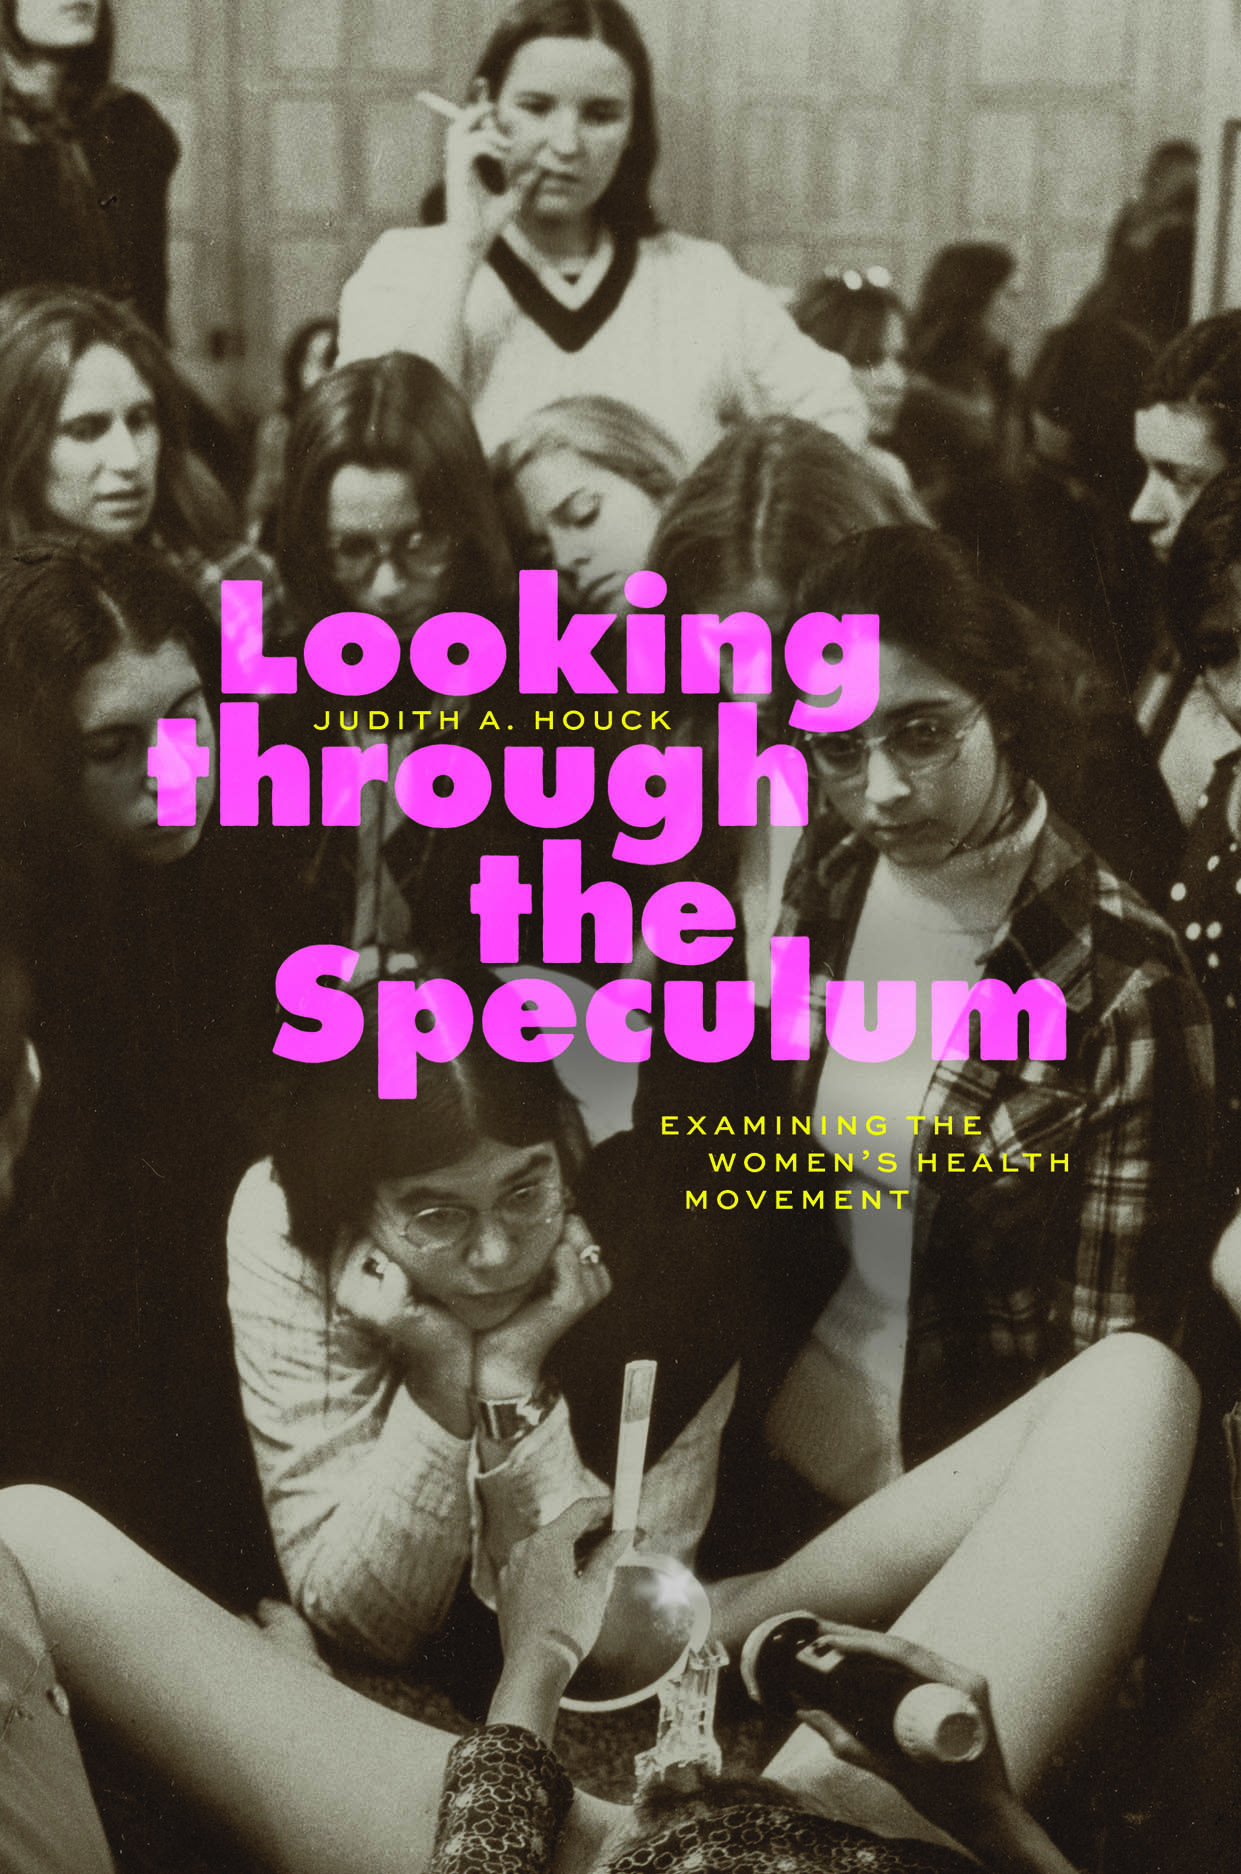 Looking through the Speculum: Examining the Women's Health Movement, Houck